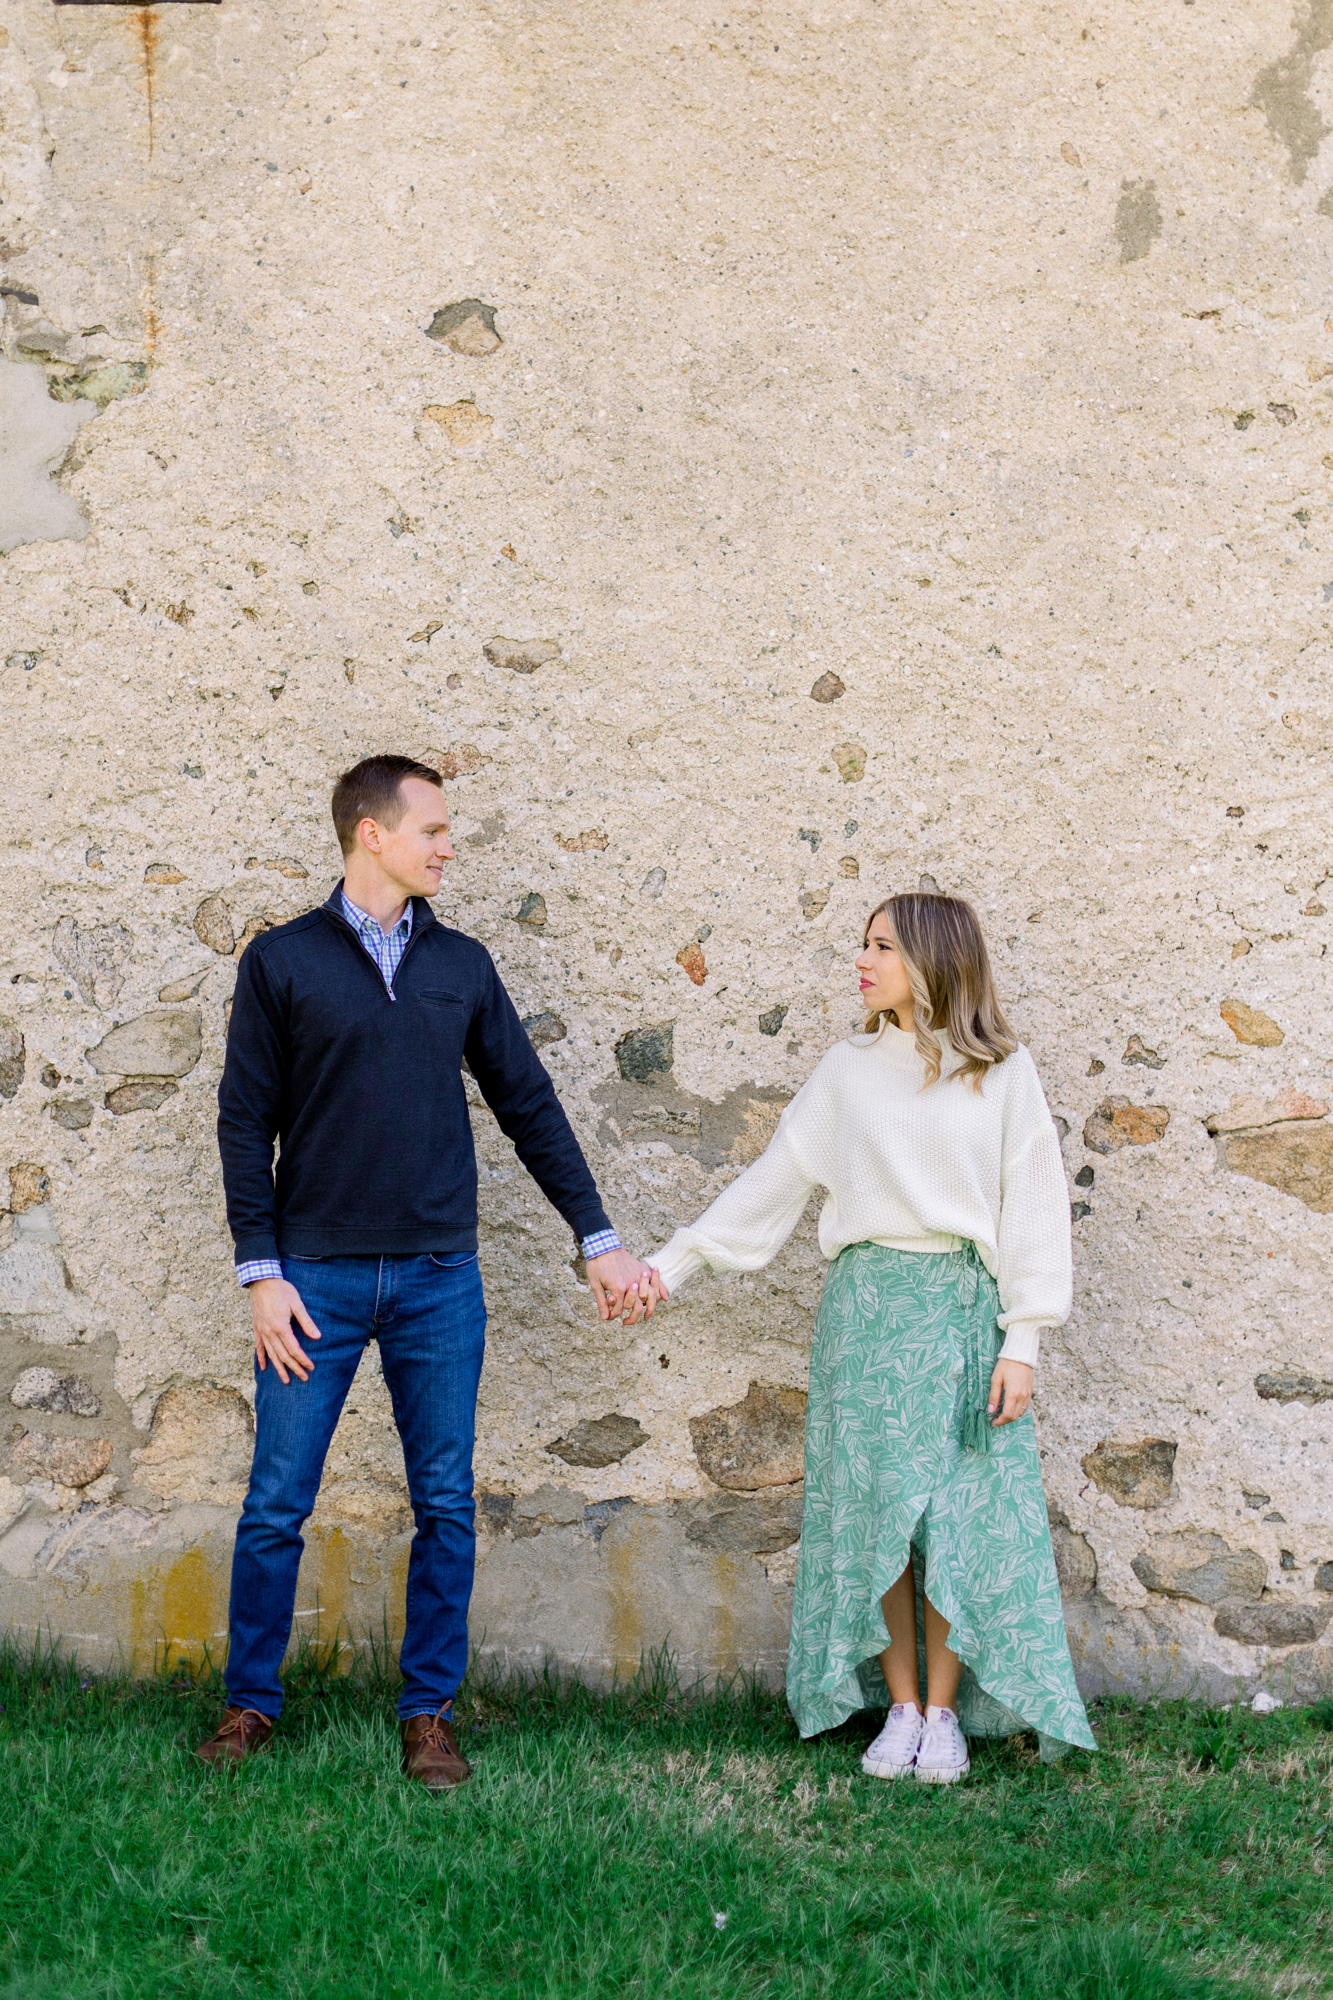 Charming Waterloo Village Engagement Photos in Springy New Jersey